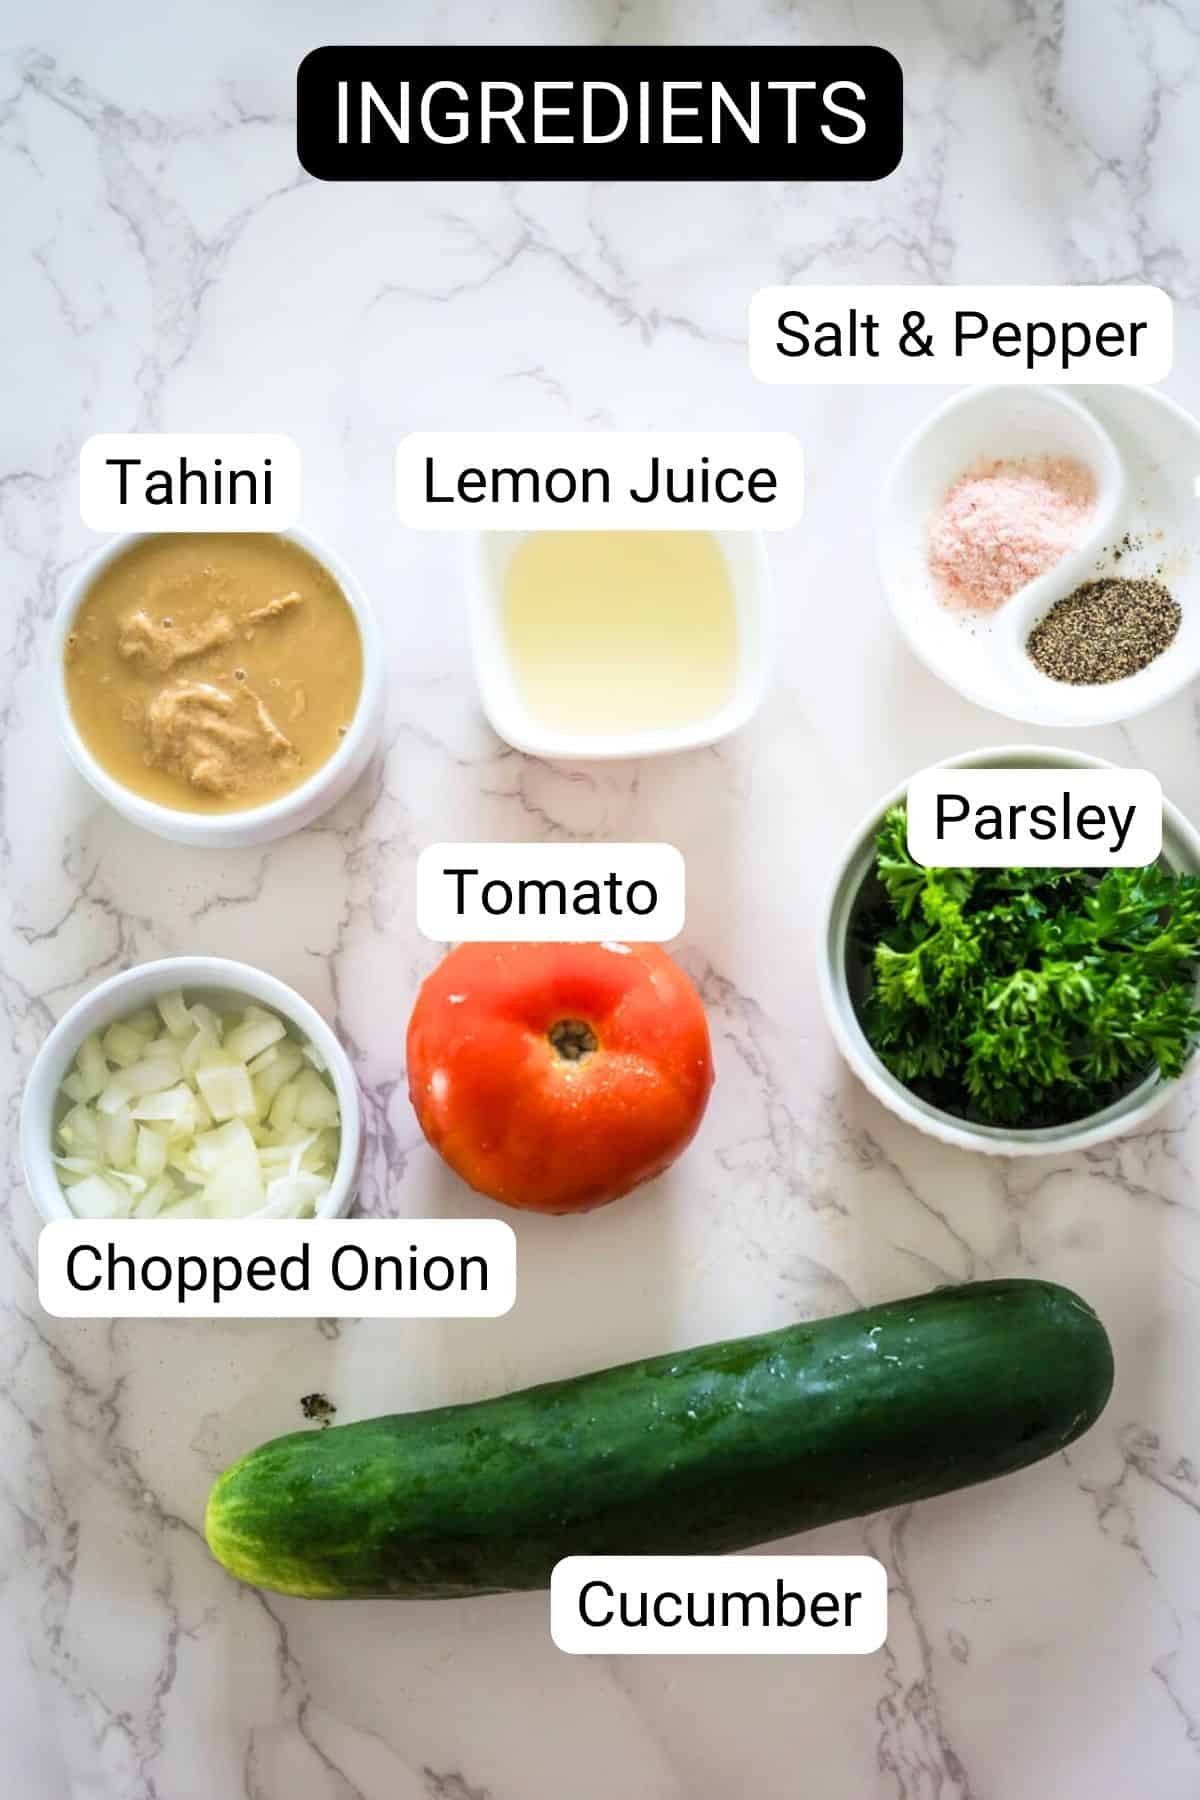 An assortment of fresh ingredients labeled for a recipe, including tahini, lemon juice, salt & pepper, chopped onion, tomato, parsley, and cucumber, arranged on a marble surface.